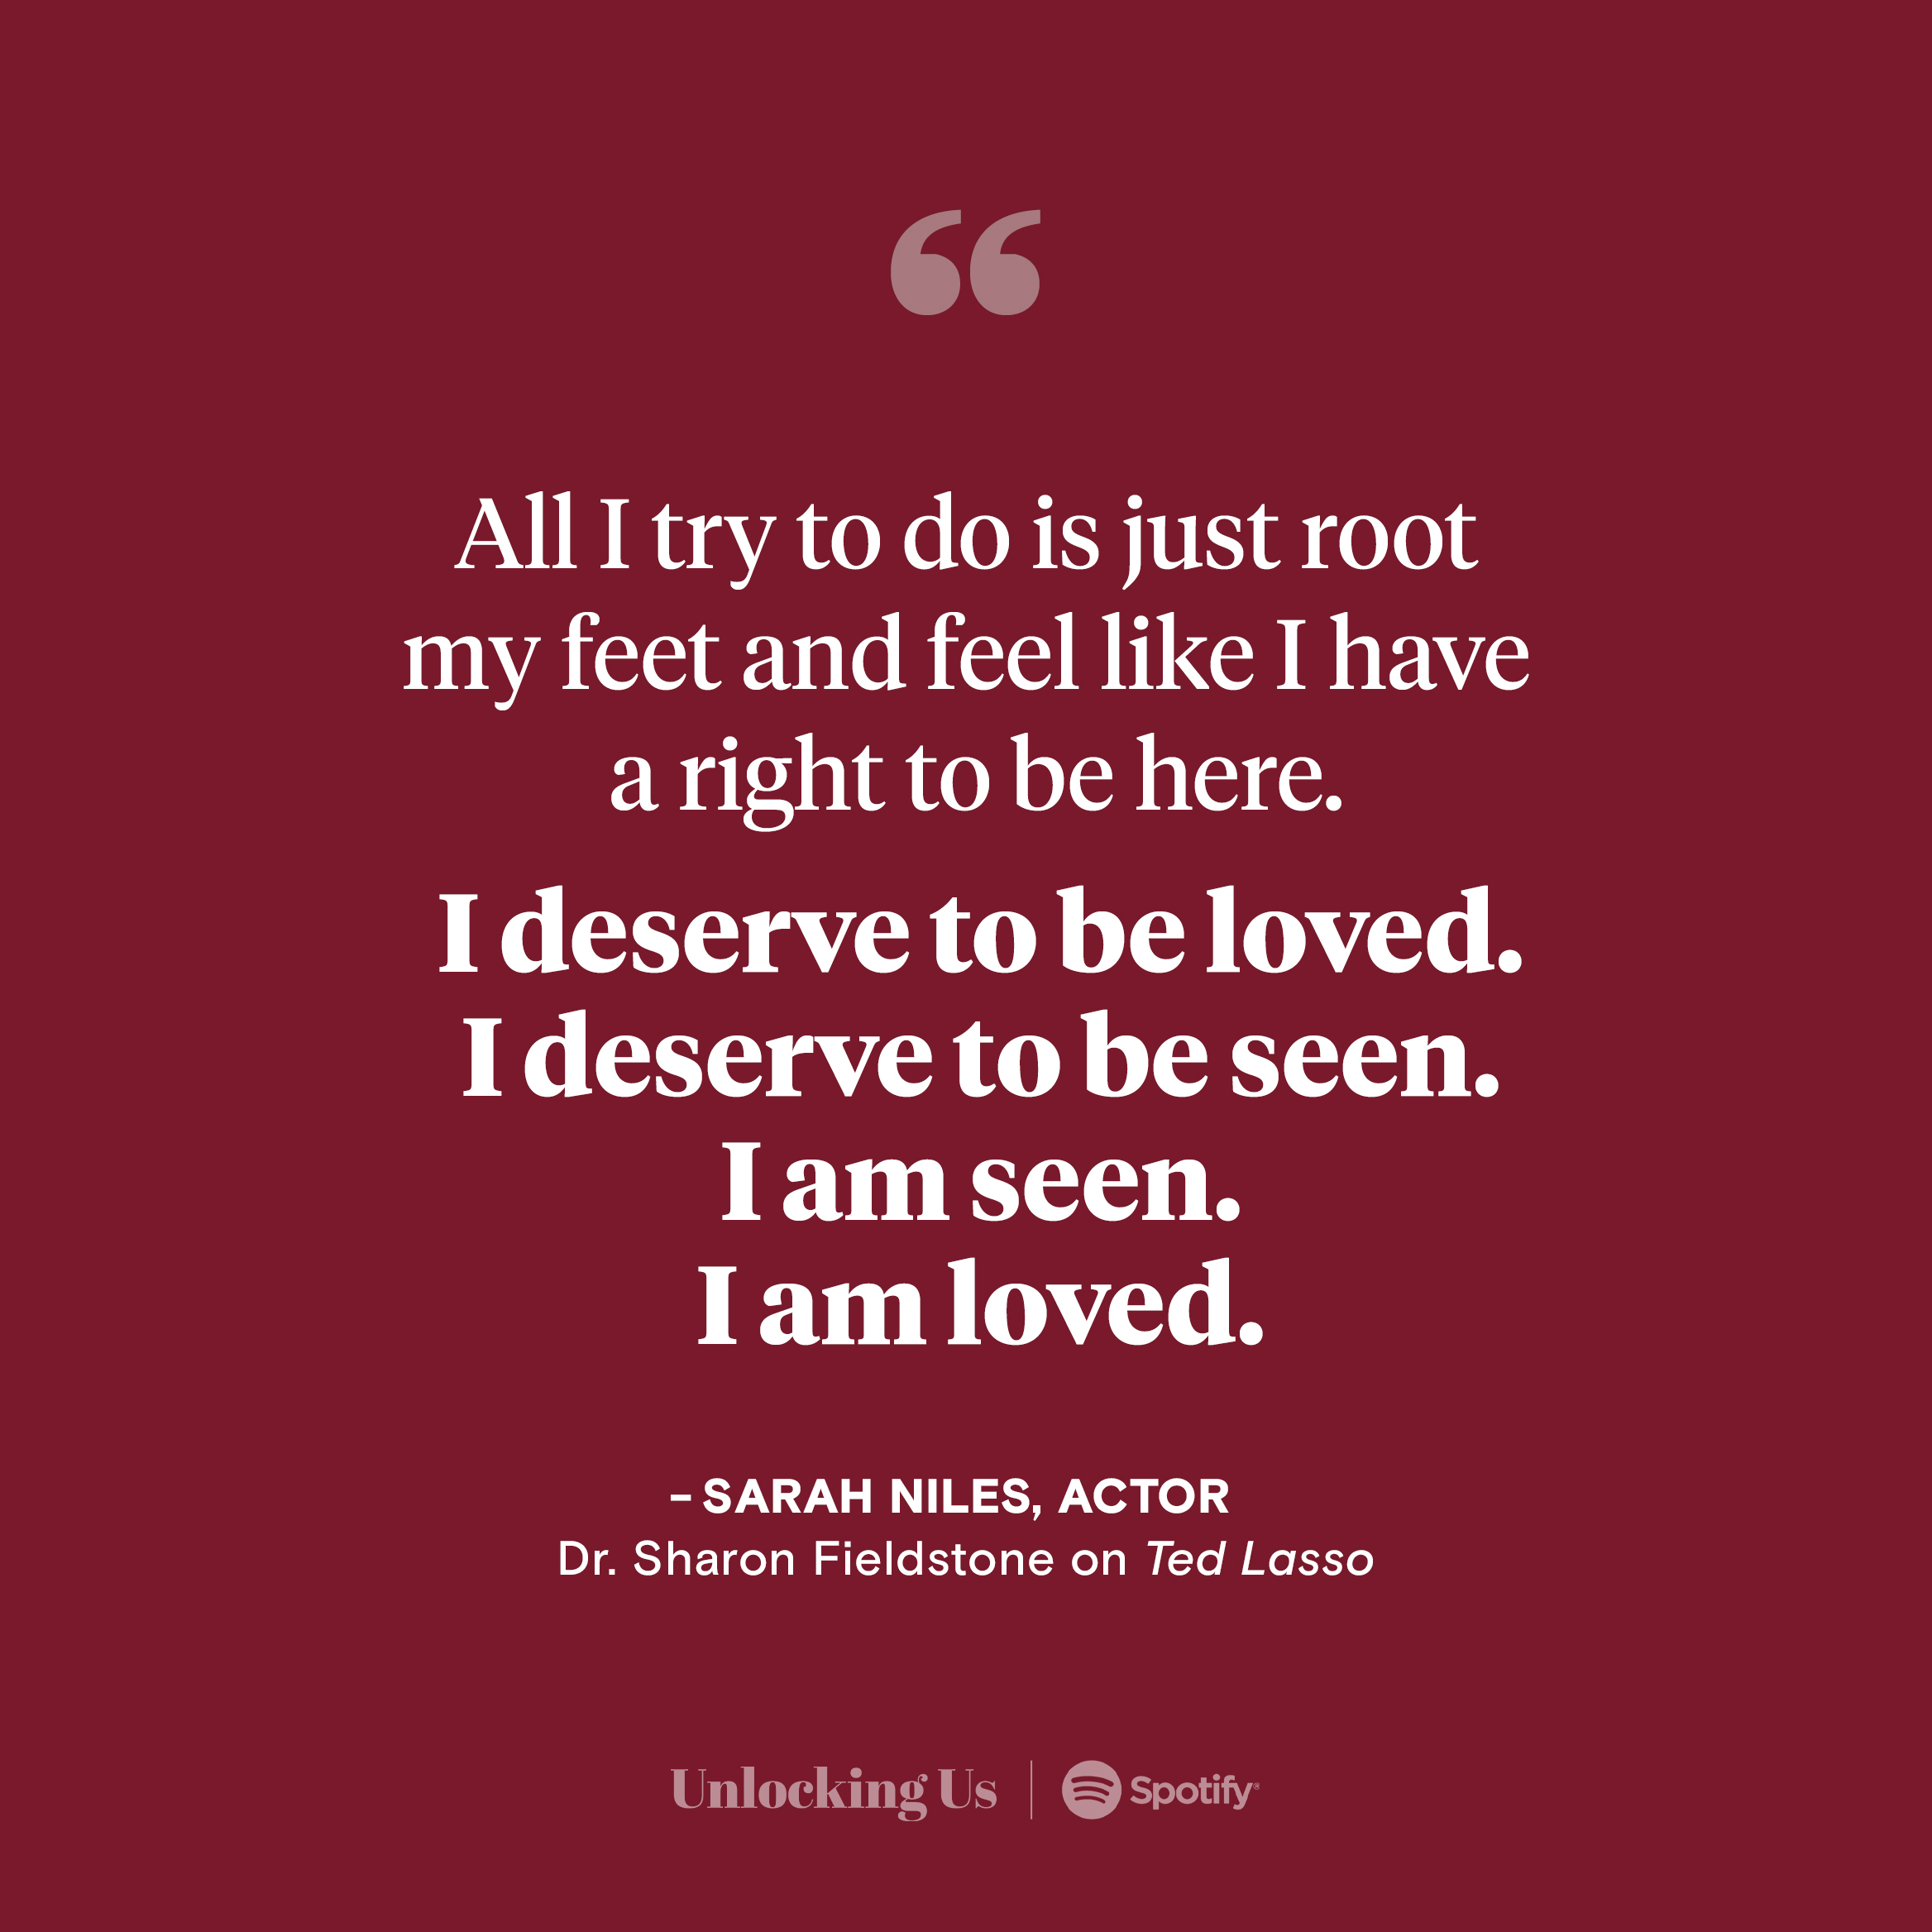 All I try to do is just root my feet and feel like I have aright to be here. I deserve to be loved. I deserve to be seen. I am seen. I am loved. — Sarah Niles, Actor, portraying Dr. Sharon Fieldstone on Ted Lasso. Listen to her and Brene on Unlocking Us, now on Spotify